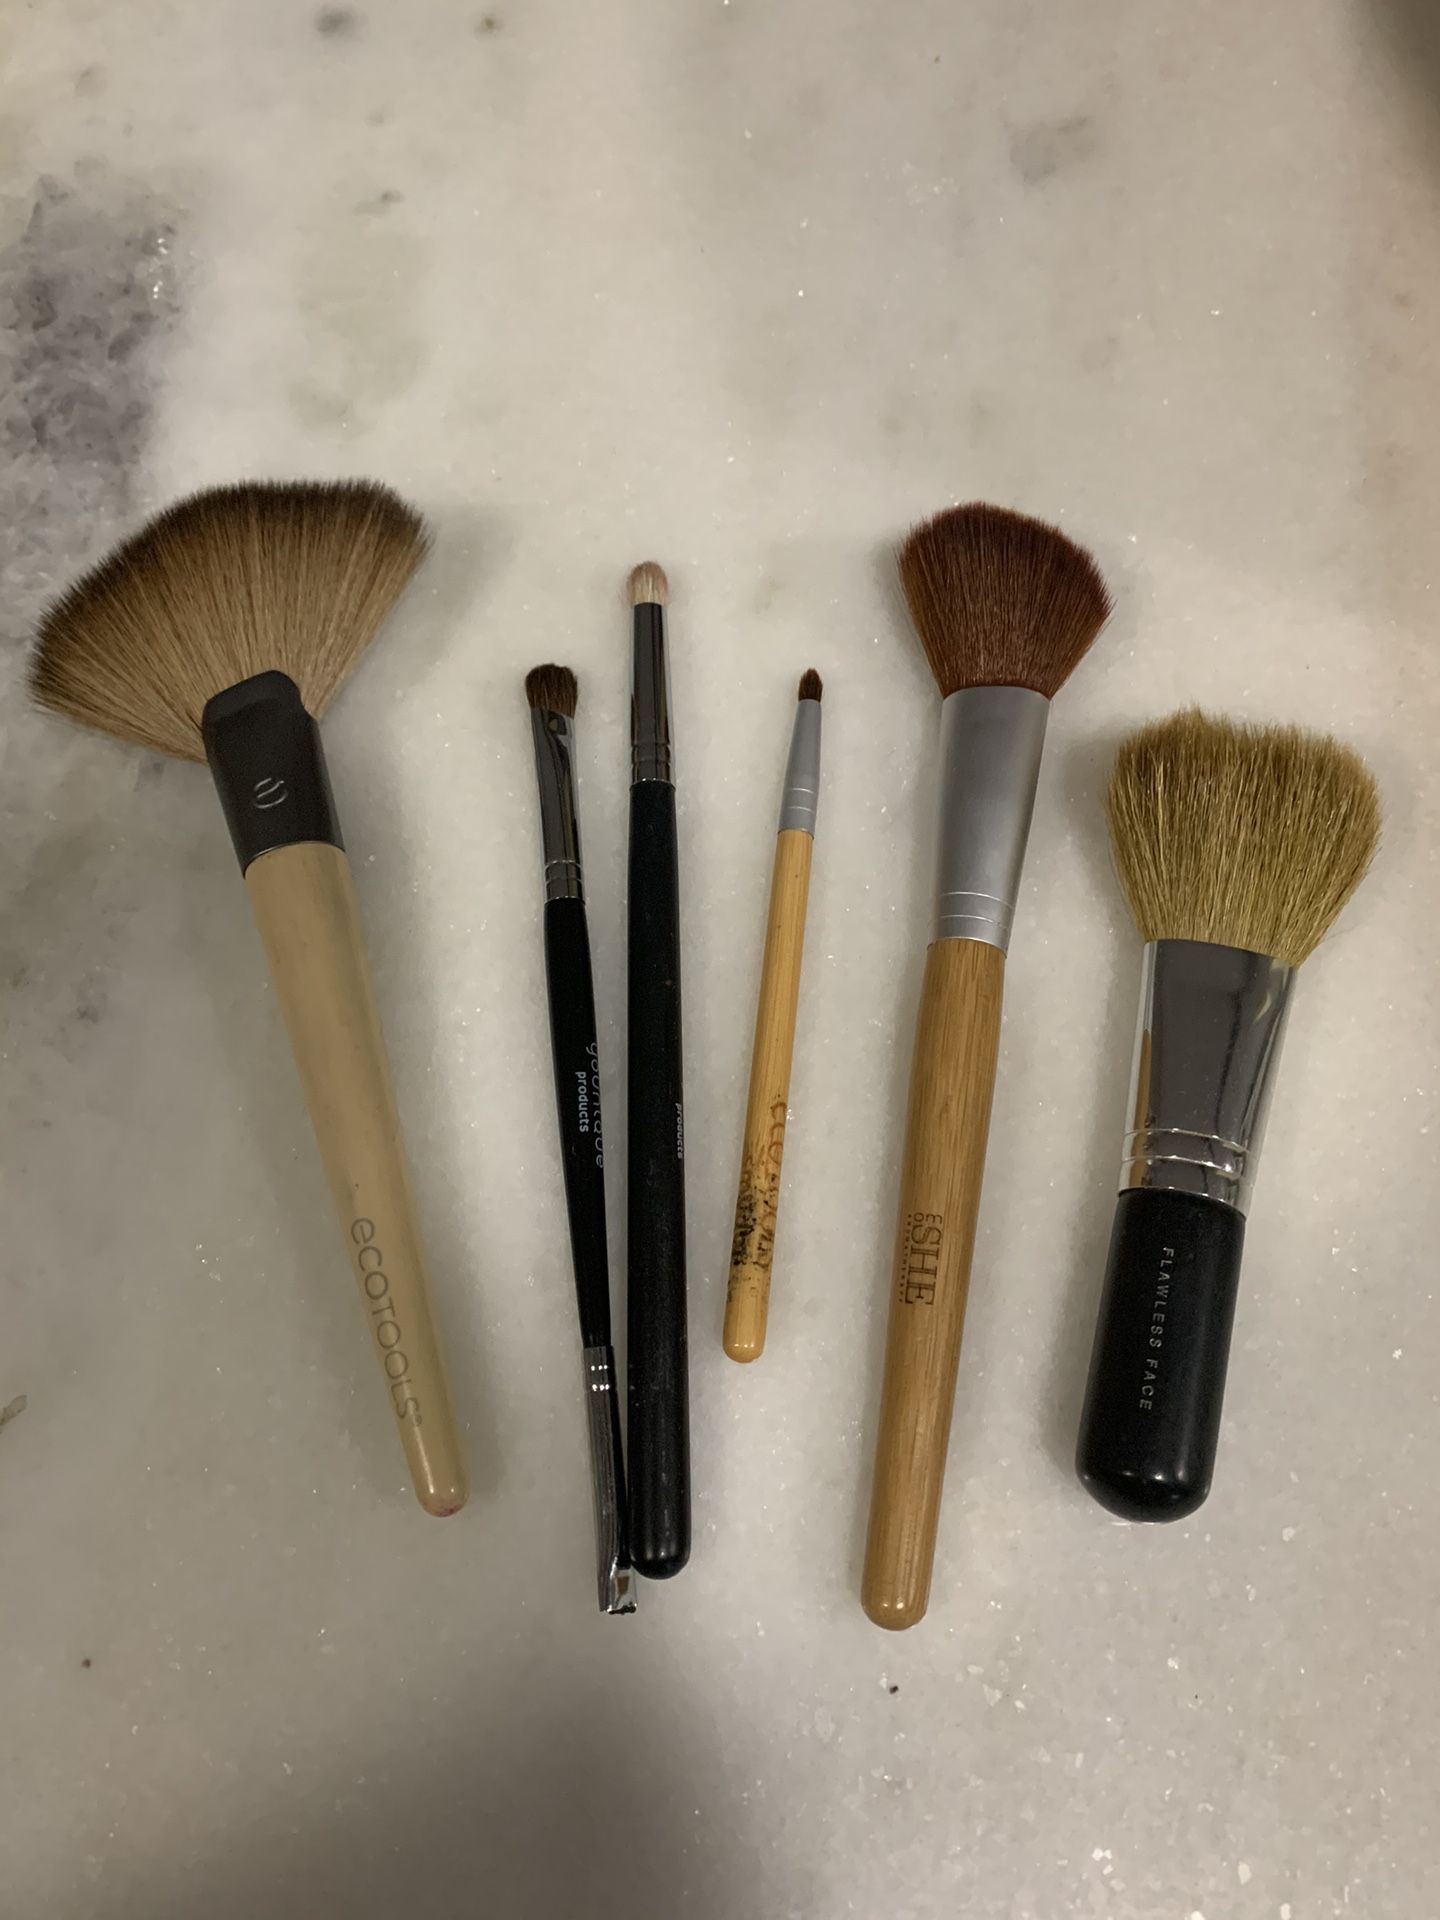 Lot of makeup brushes